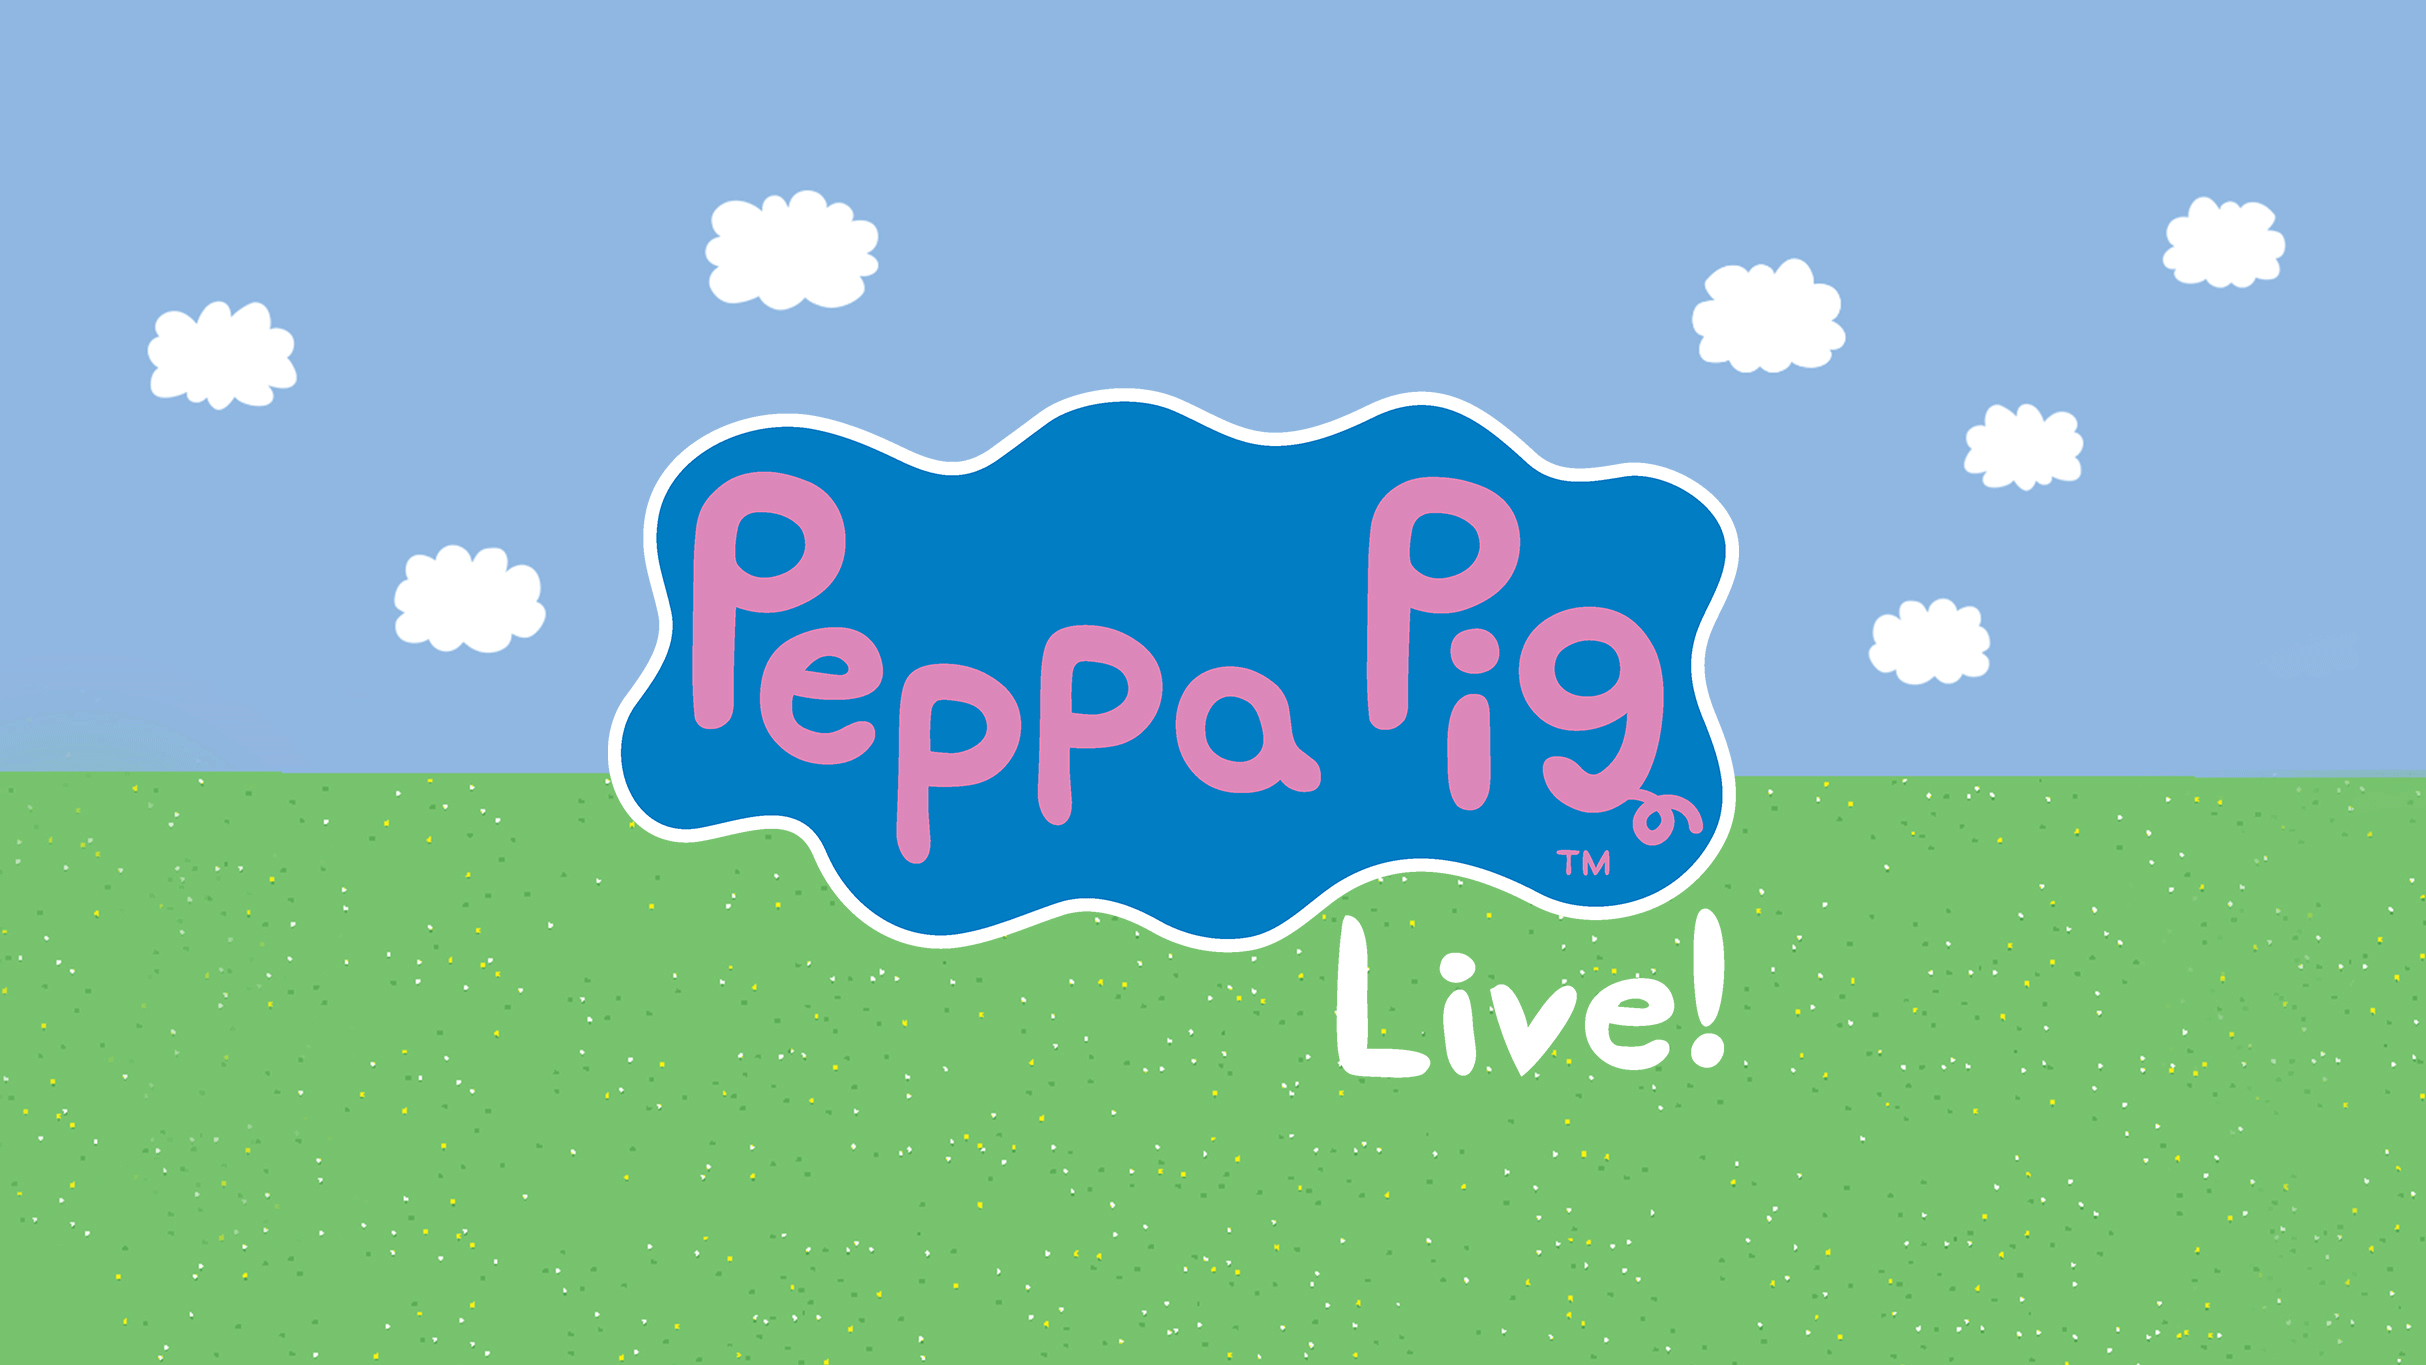 Peppa Pig's Sing-Along Party!